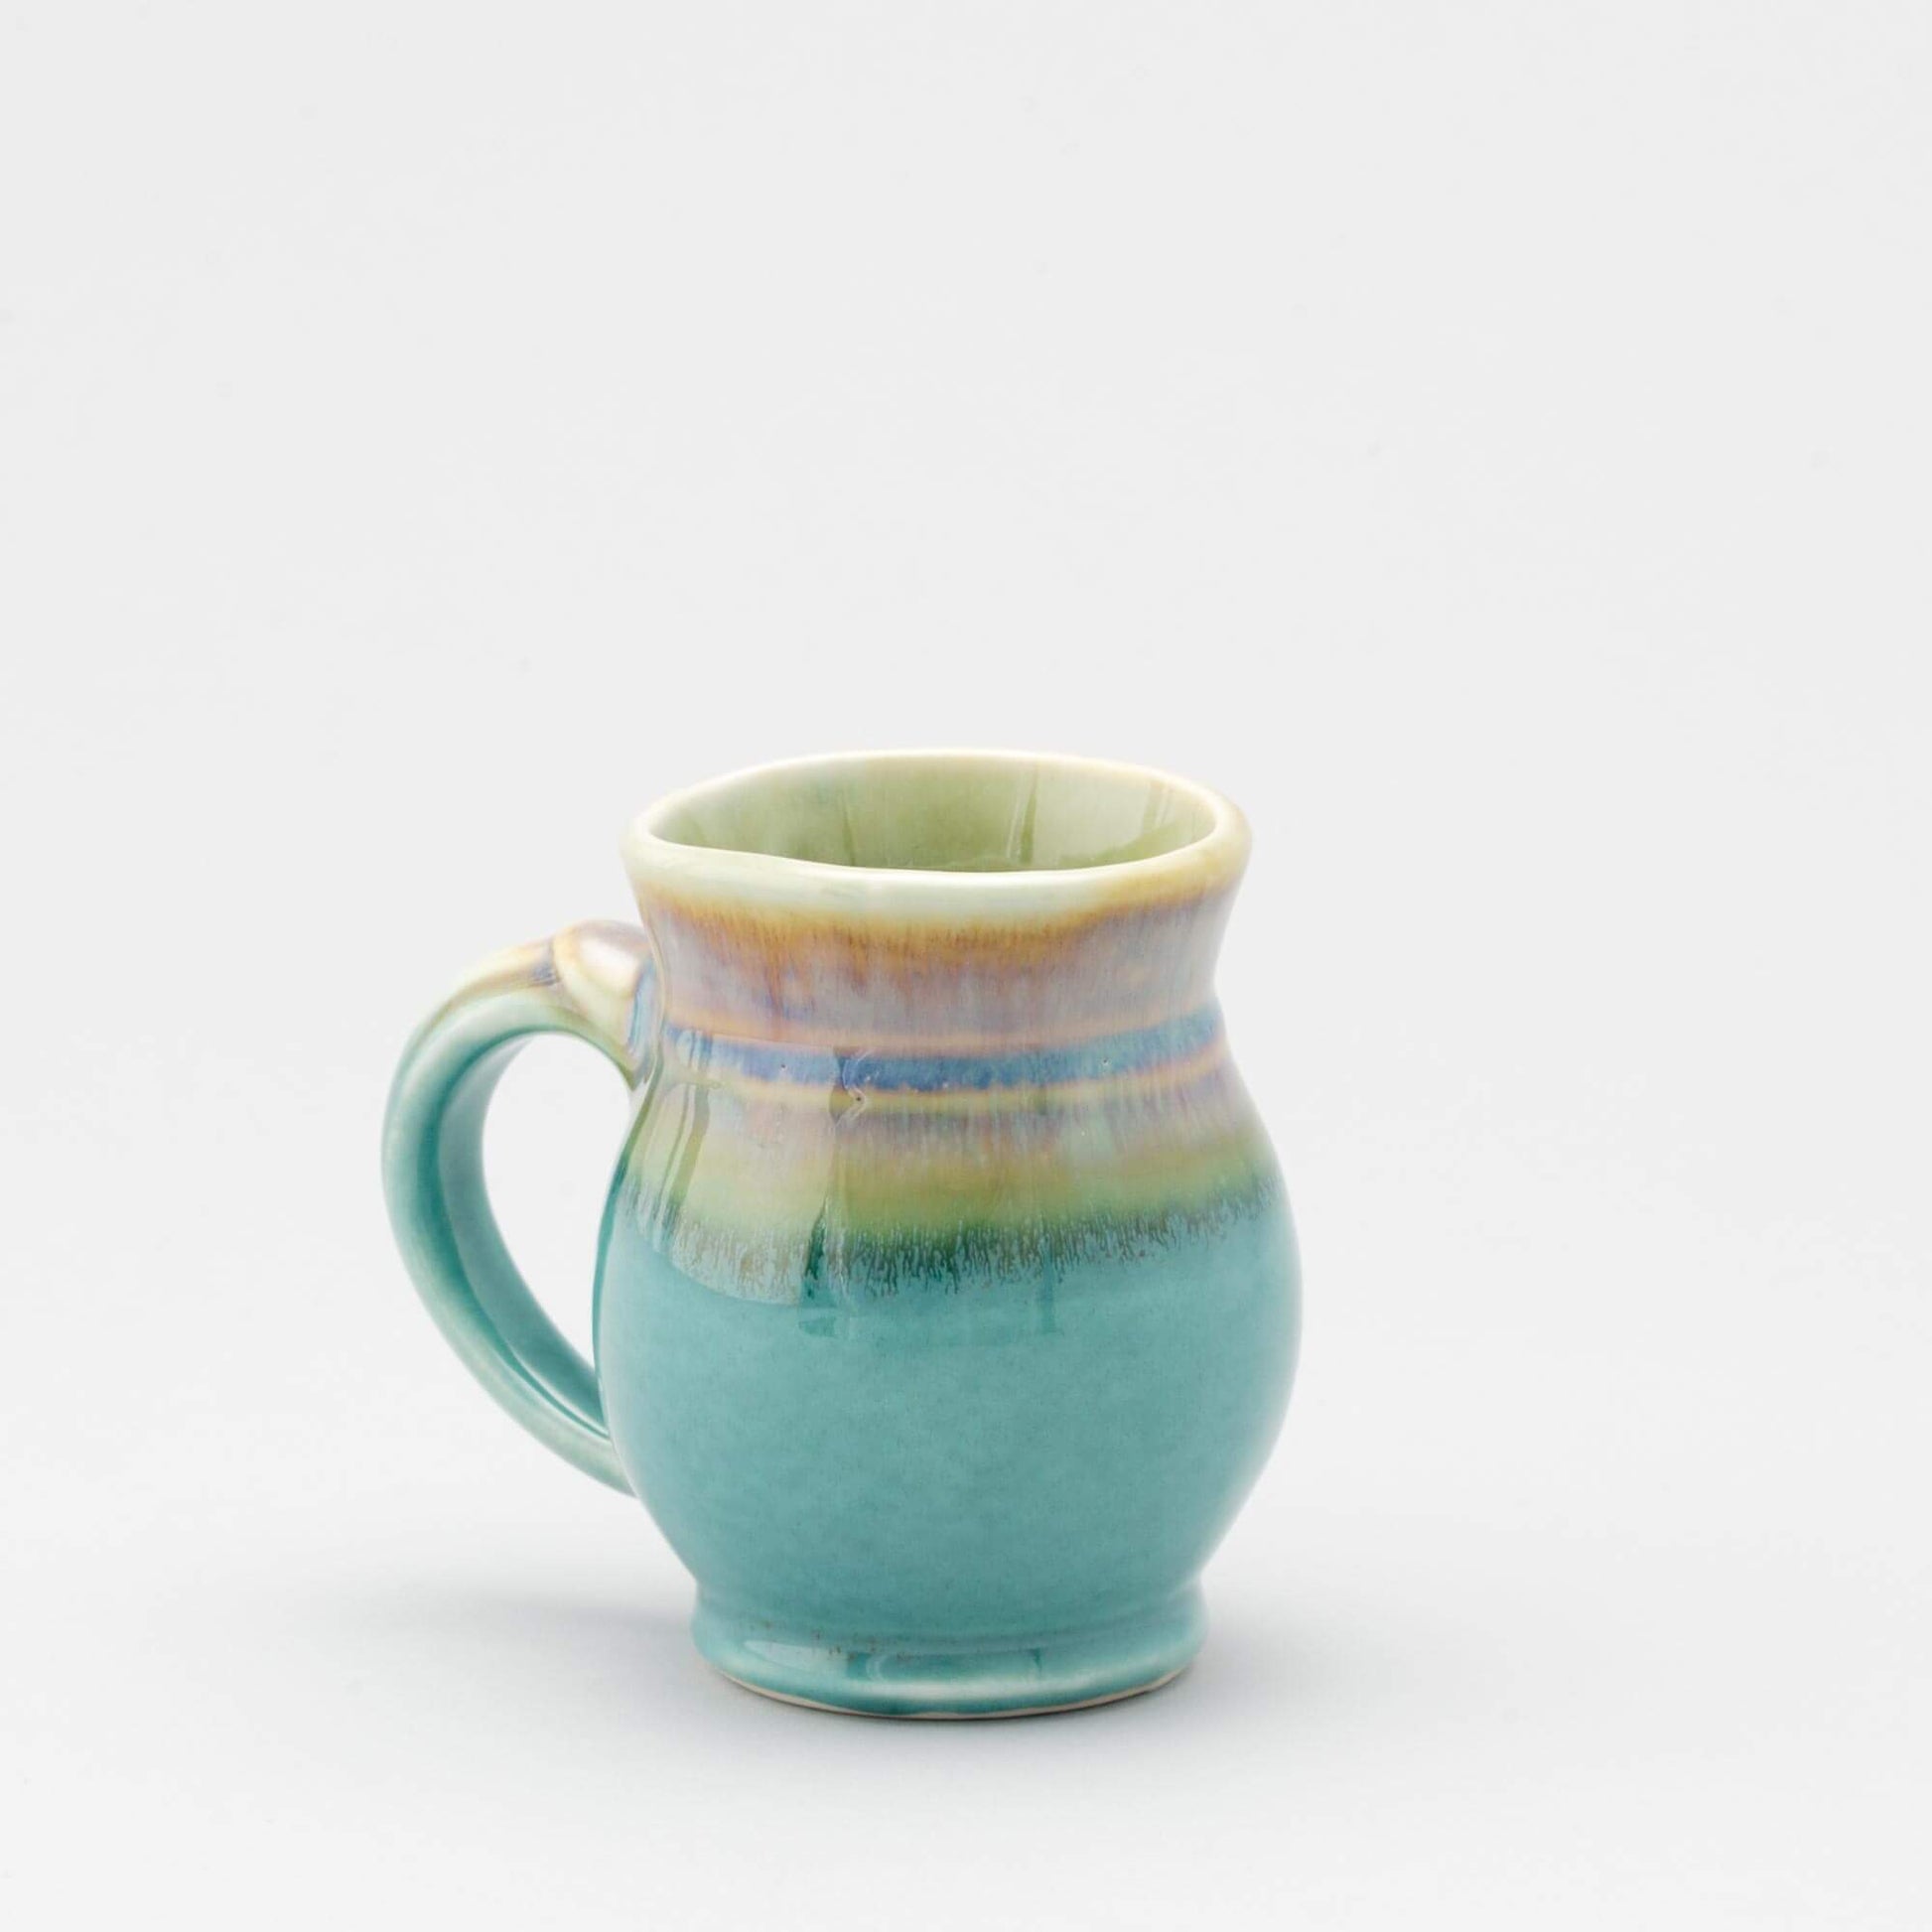 Handmade Pottery Curvy Mug made by Georgetown Pottery in Maine Green Oribe